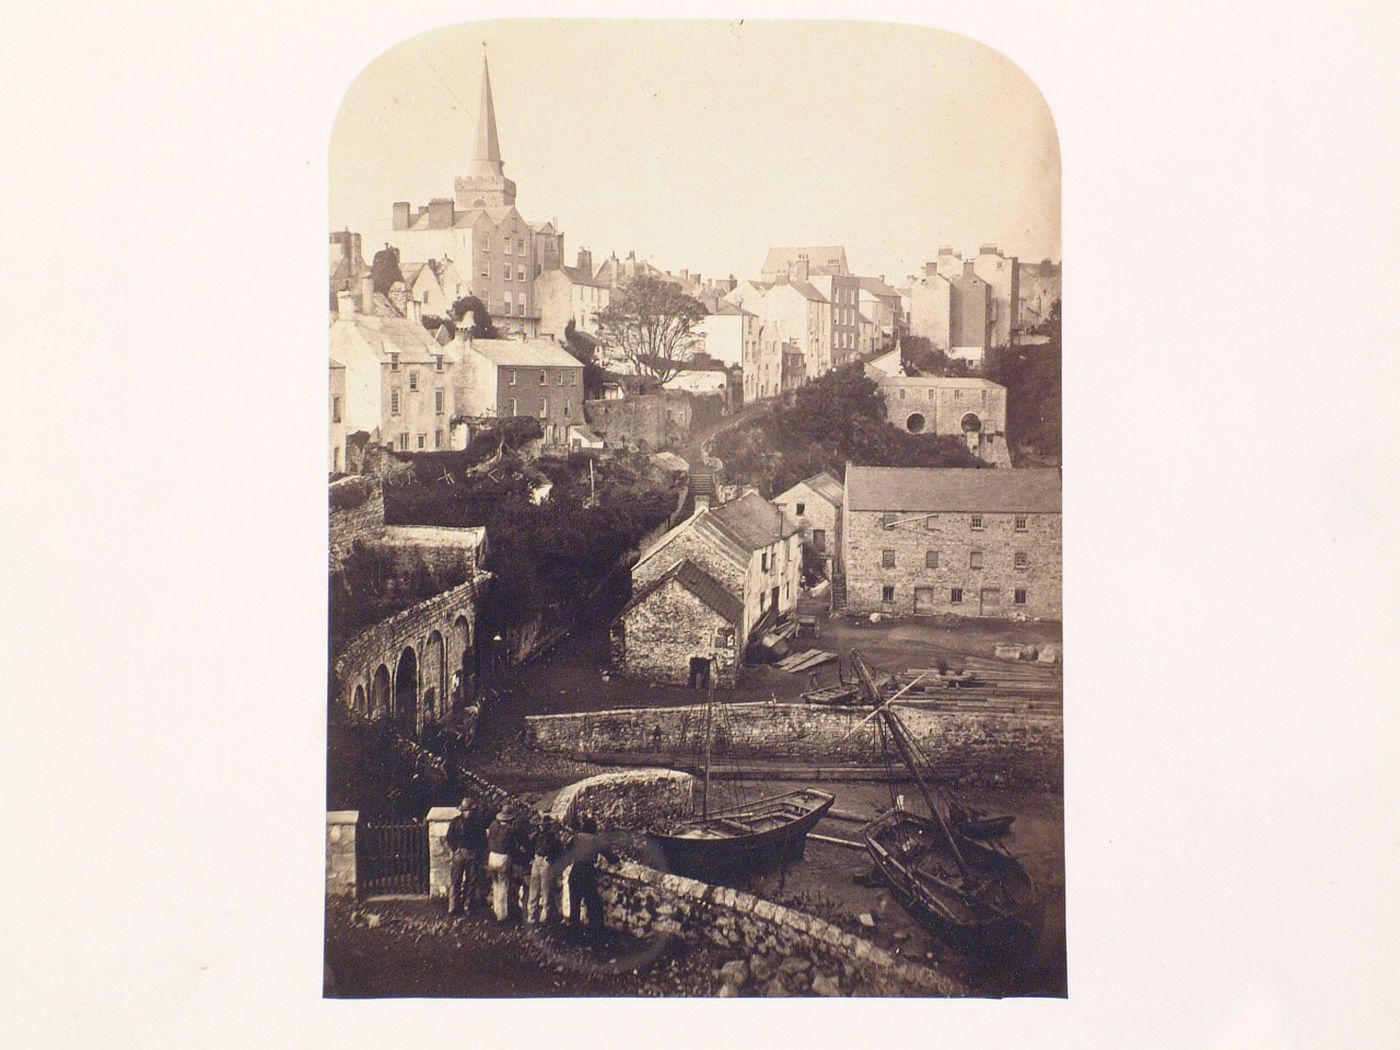 View of Tenby town and habour, Pembrokeshire, Wales